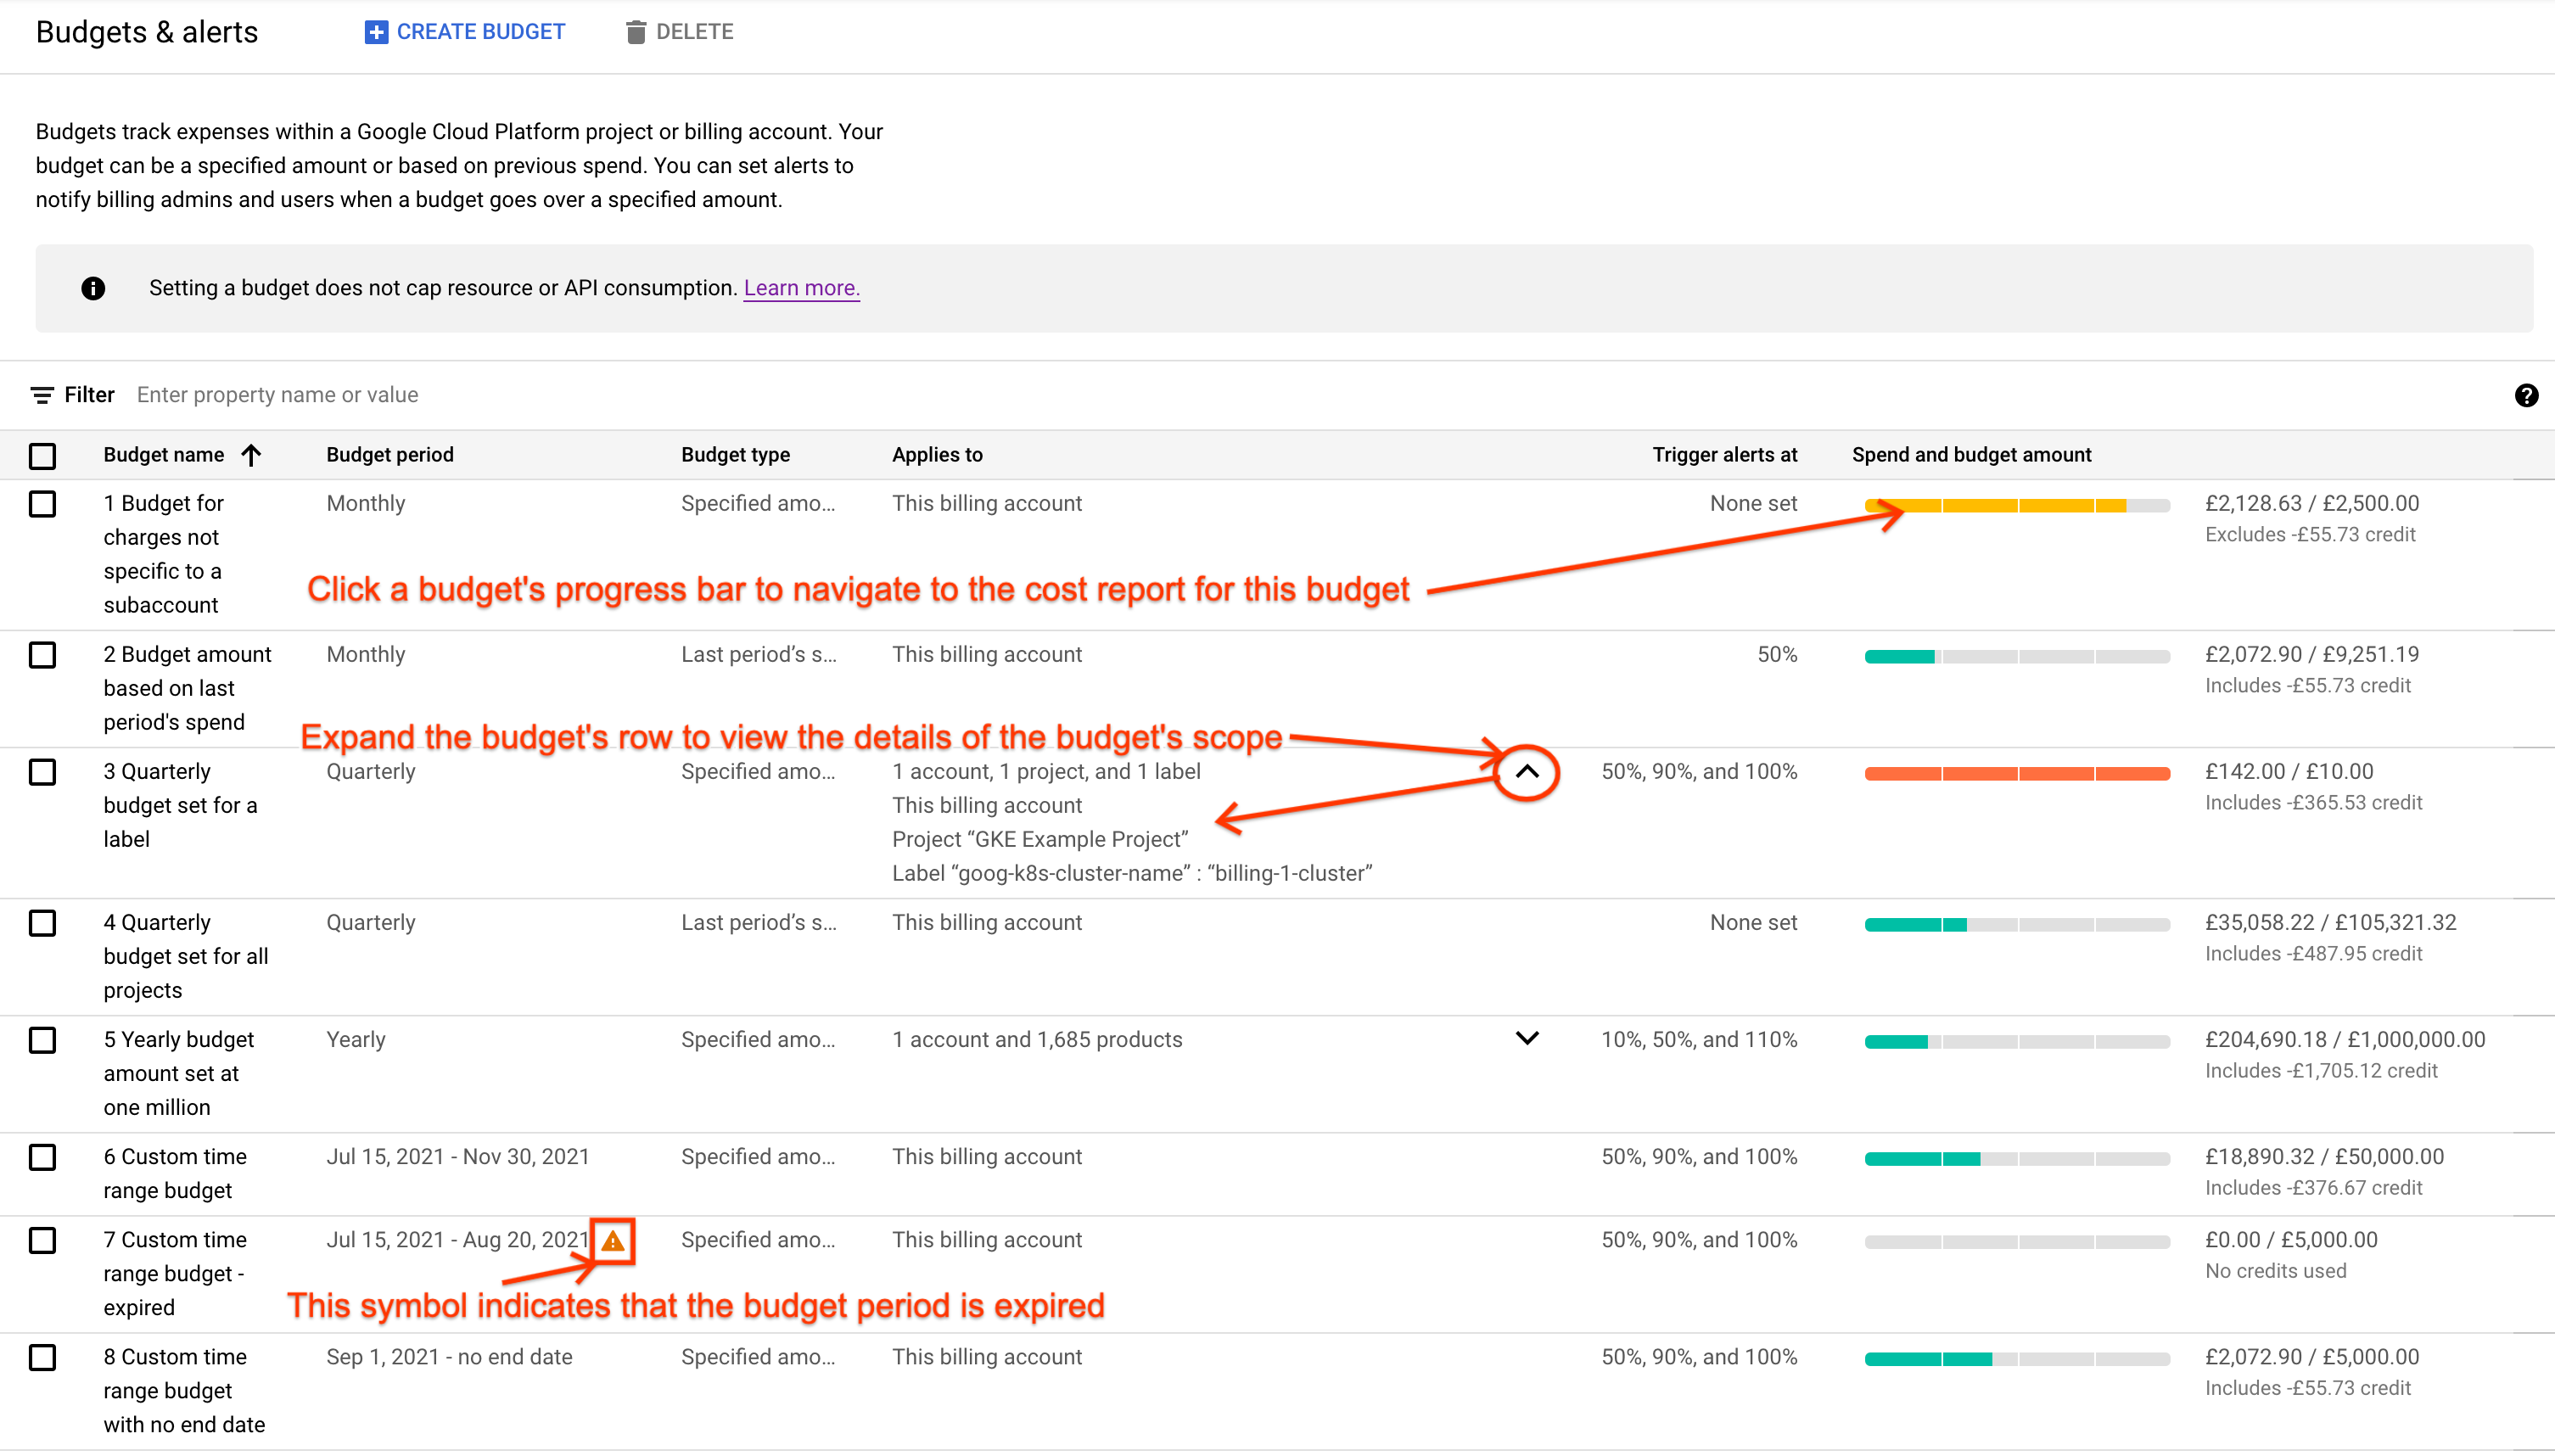 Example of the Budgets & alerts page accessible in the
    Google Cloud console. The page displays a list of budgets in a tabular
    format.